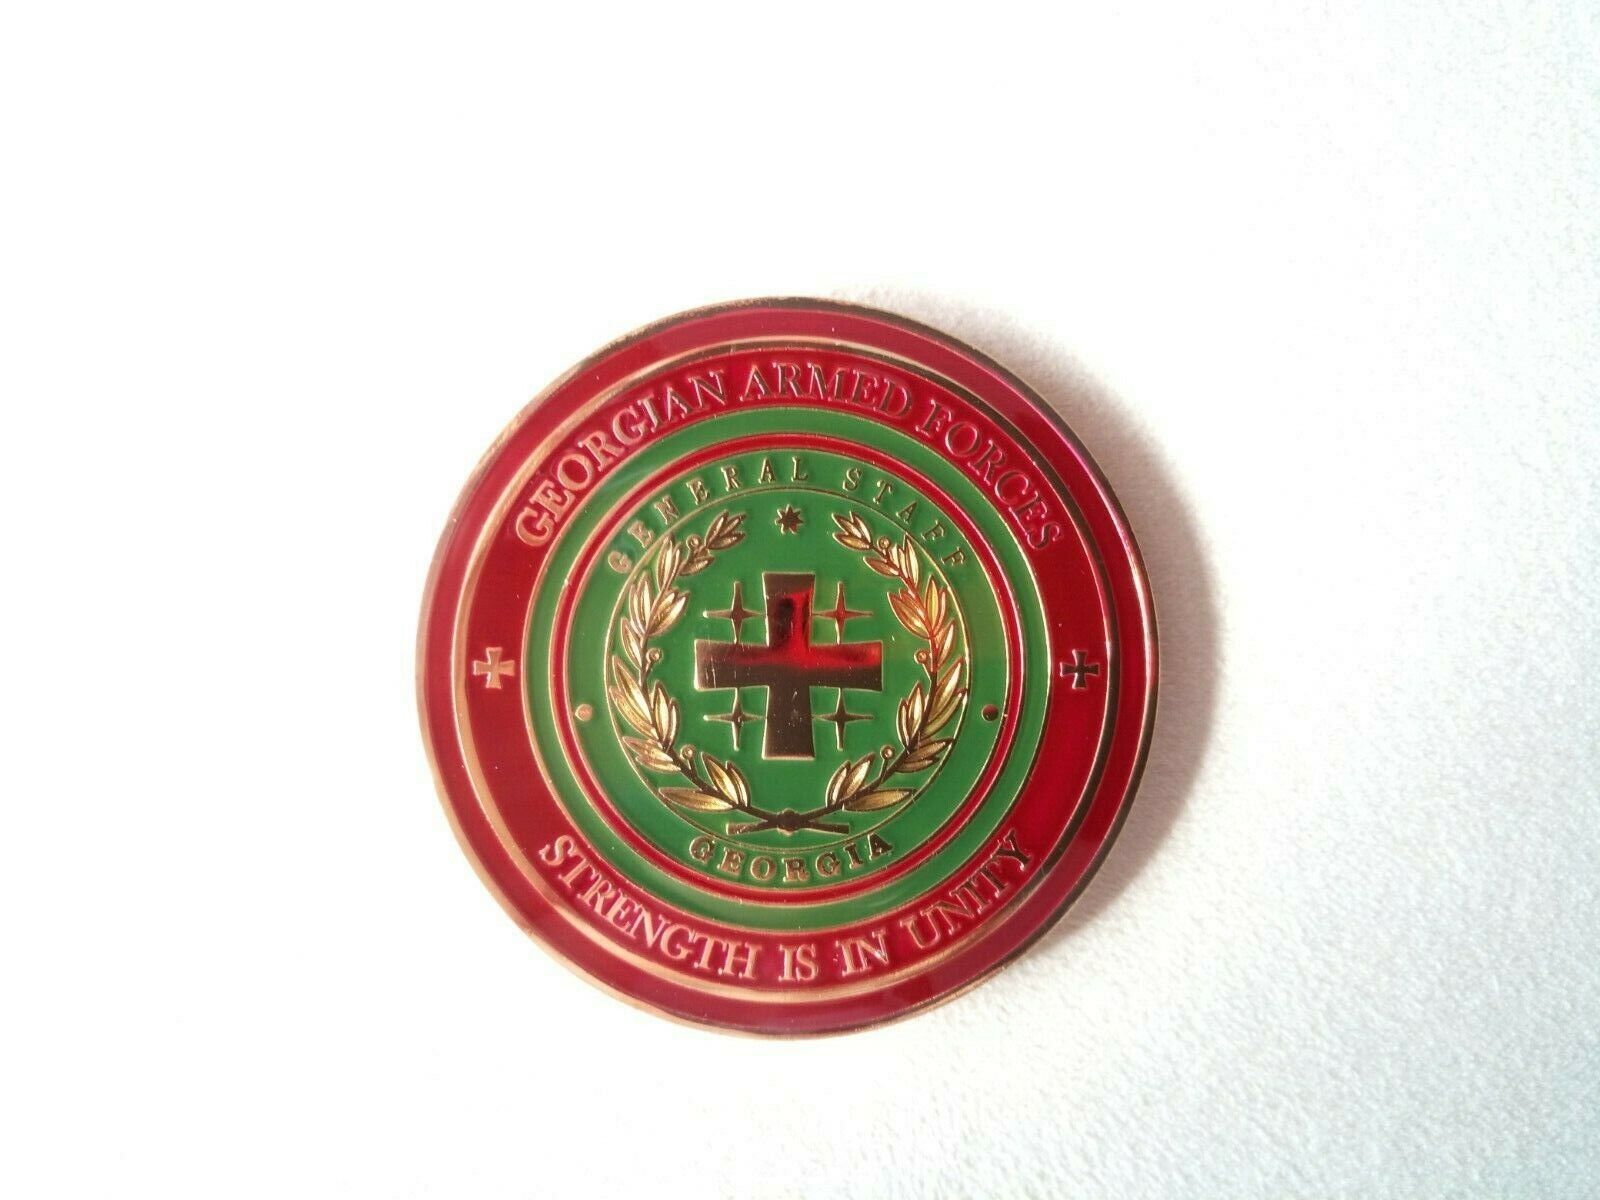 Georgian army in Afghanistan Challenge COIN, Georgia RARE Resolute Support